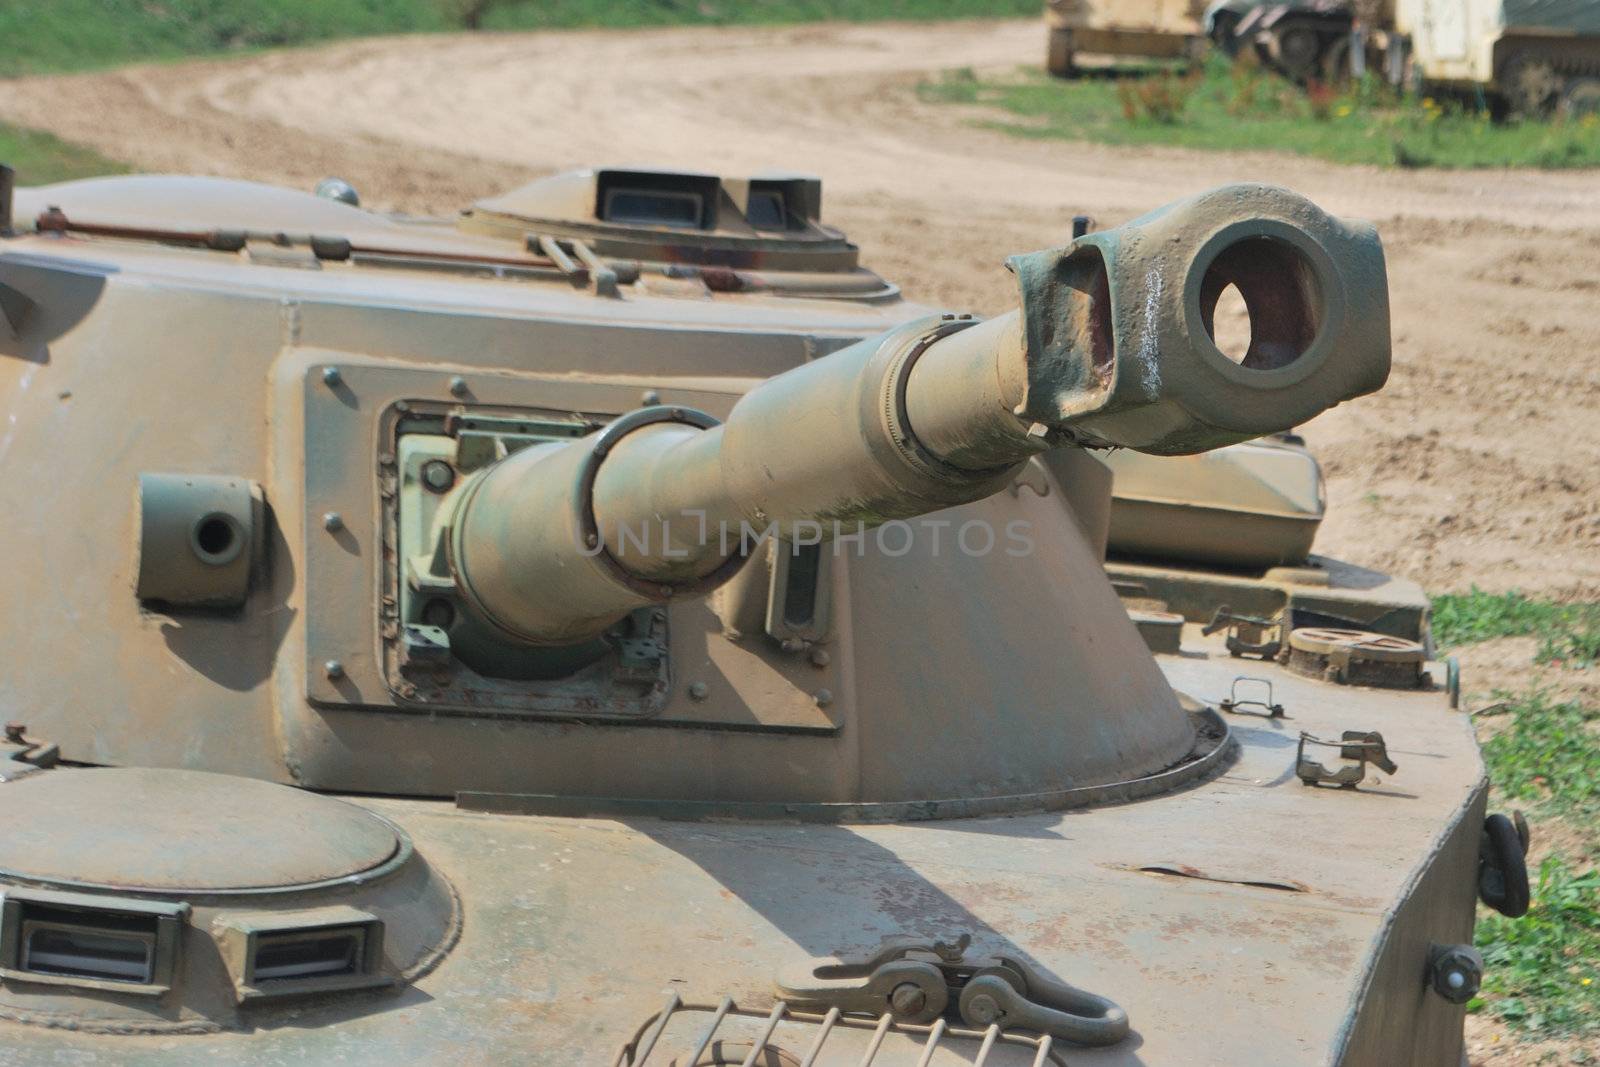 tank turret with barell pointing to camera